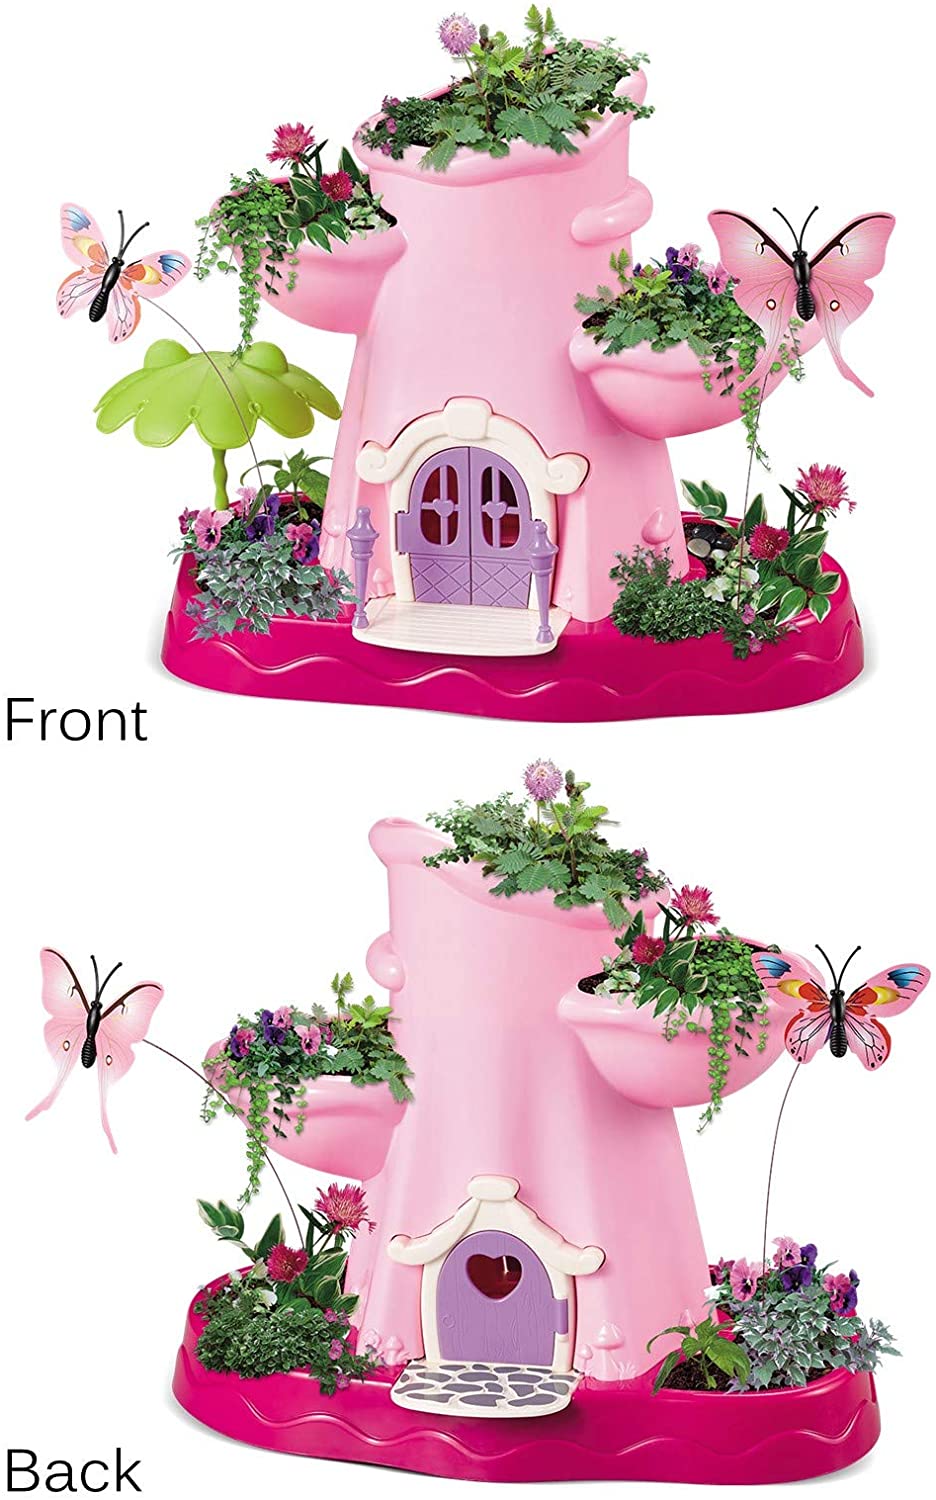 Vokodo Kids Magical Garden Growing Kit Includes Tools Seeds Soil Flower Plant Tree Interactive Play Fairy Toys Inspires Horticulture Learning Great Gift for Children Girls Pink 